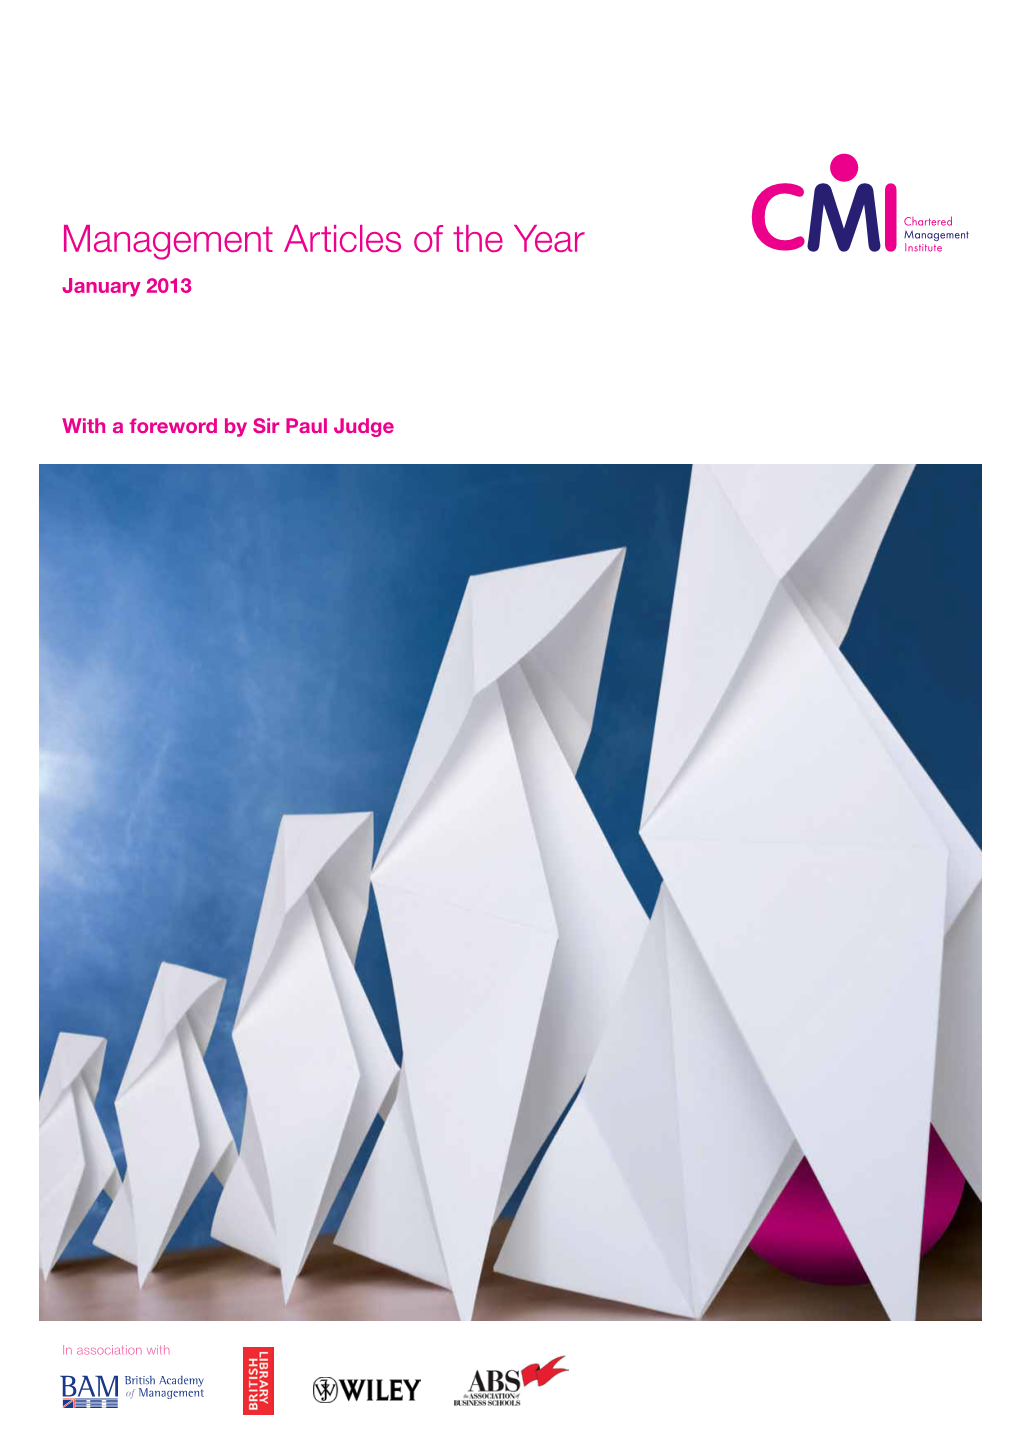 Management Articles of the Year January 2013